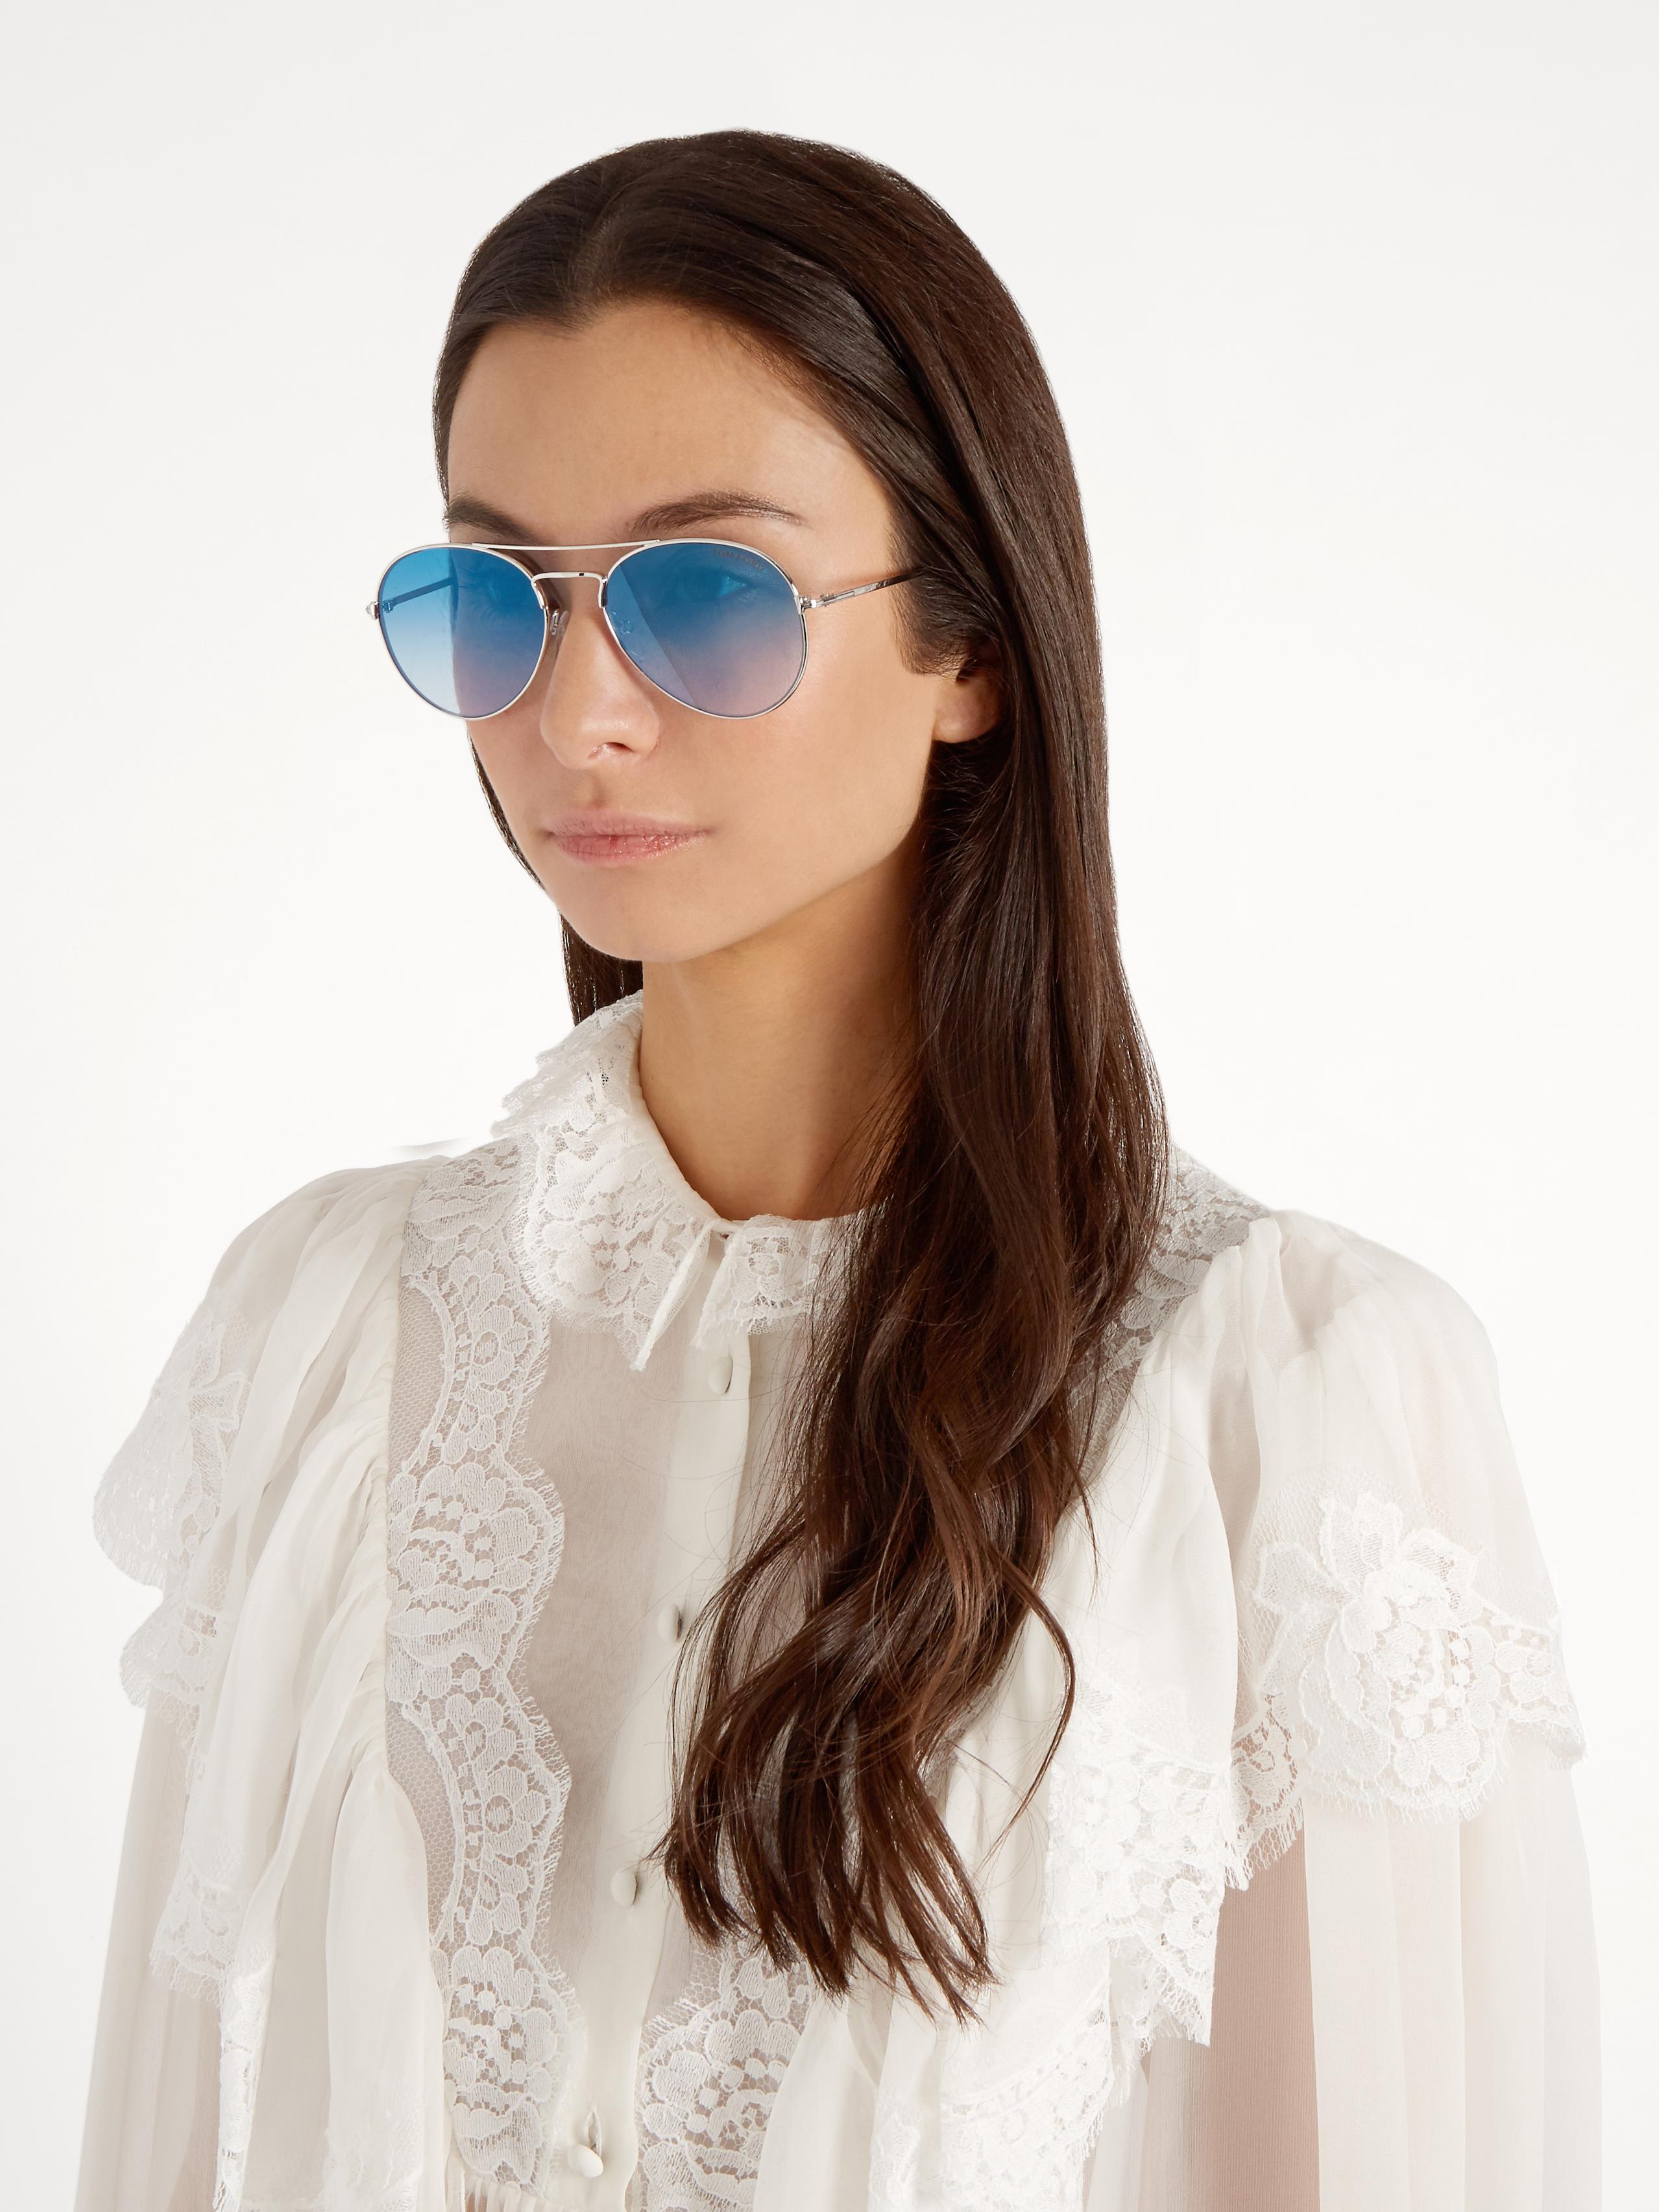 Tom Ford Ace Sunglasses Store, 57% OFF | www.geb.cat